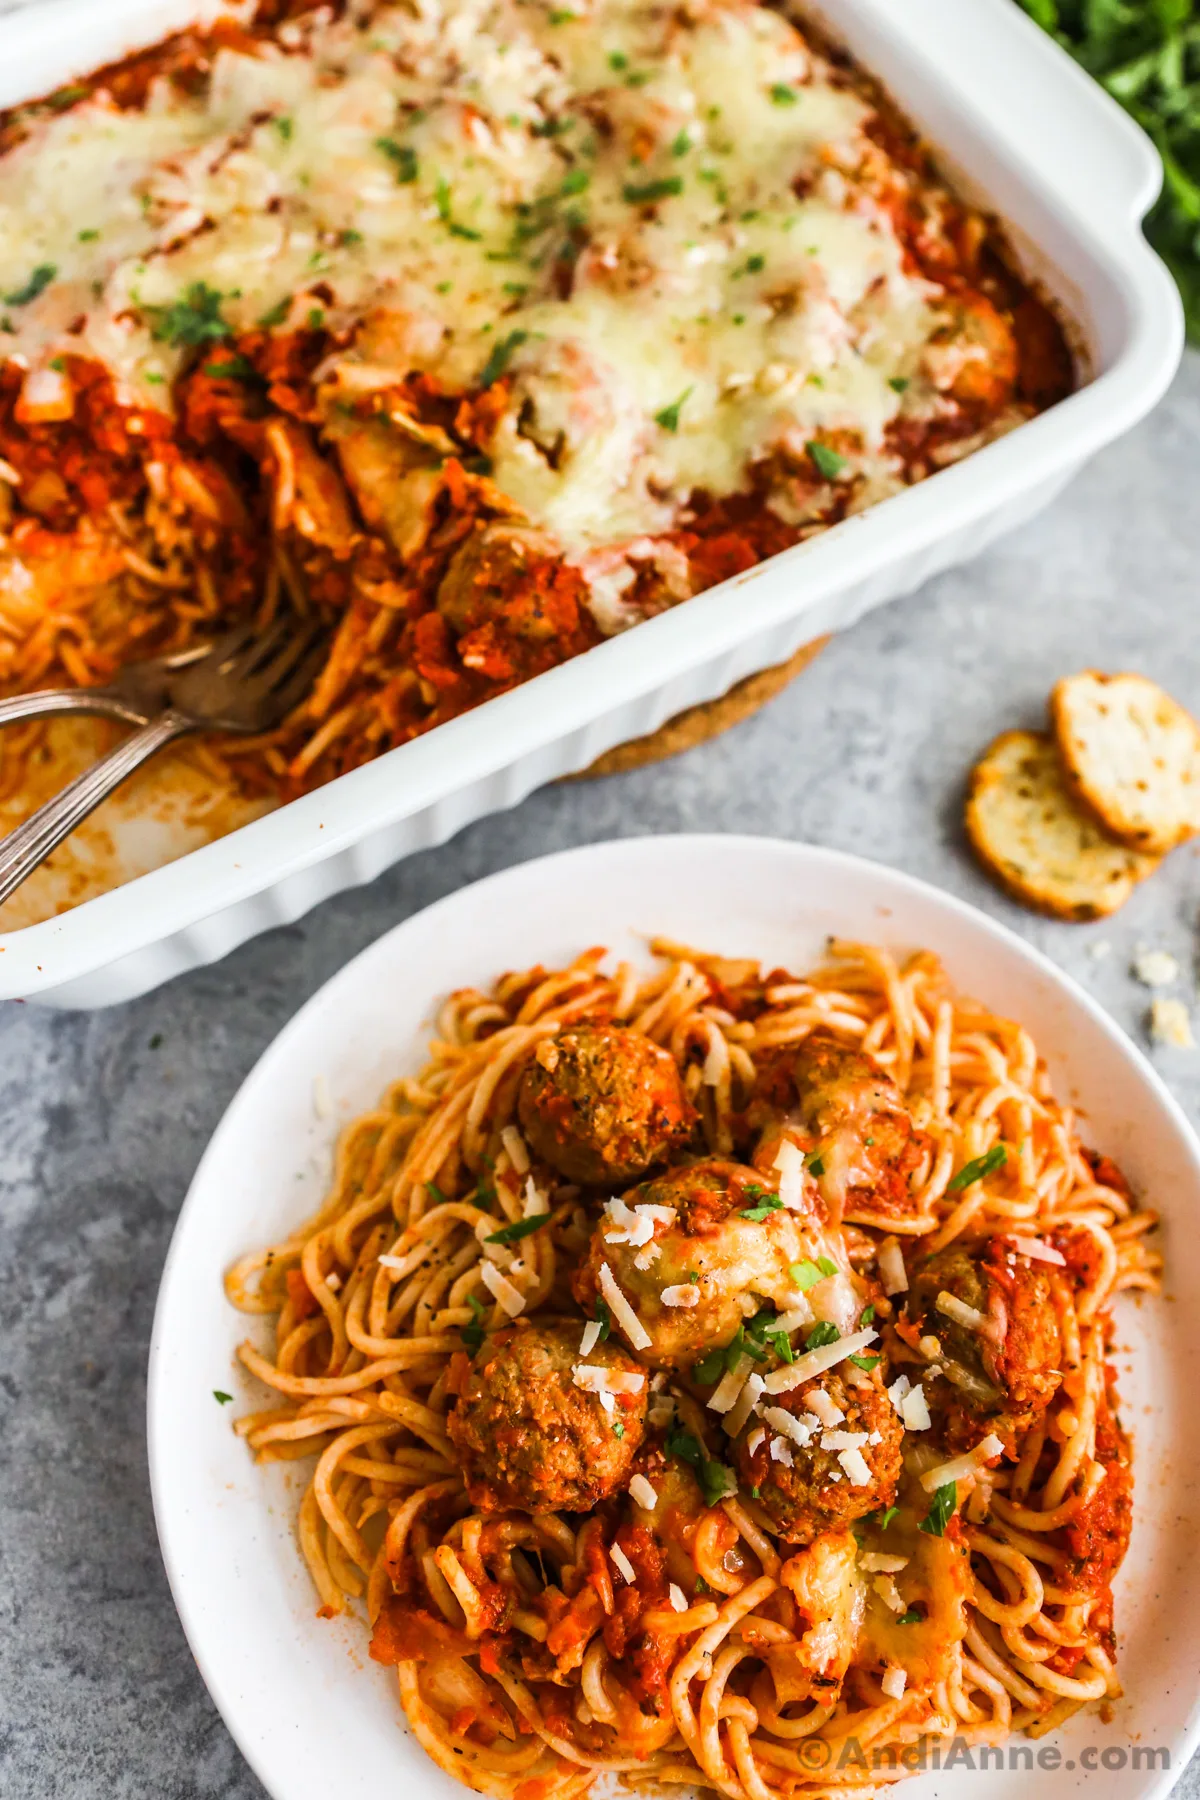 A plate of spaghetti and meatballs and a casserole dish with recipe in background.